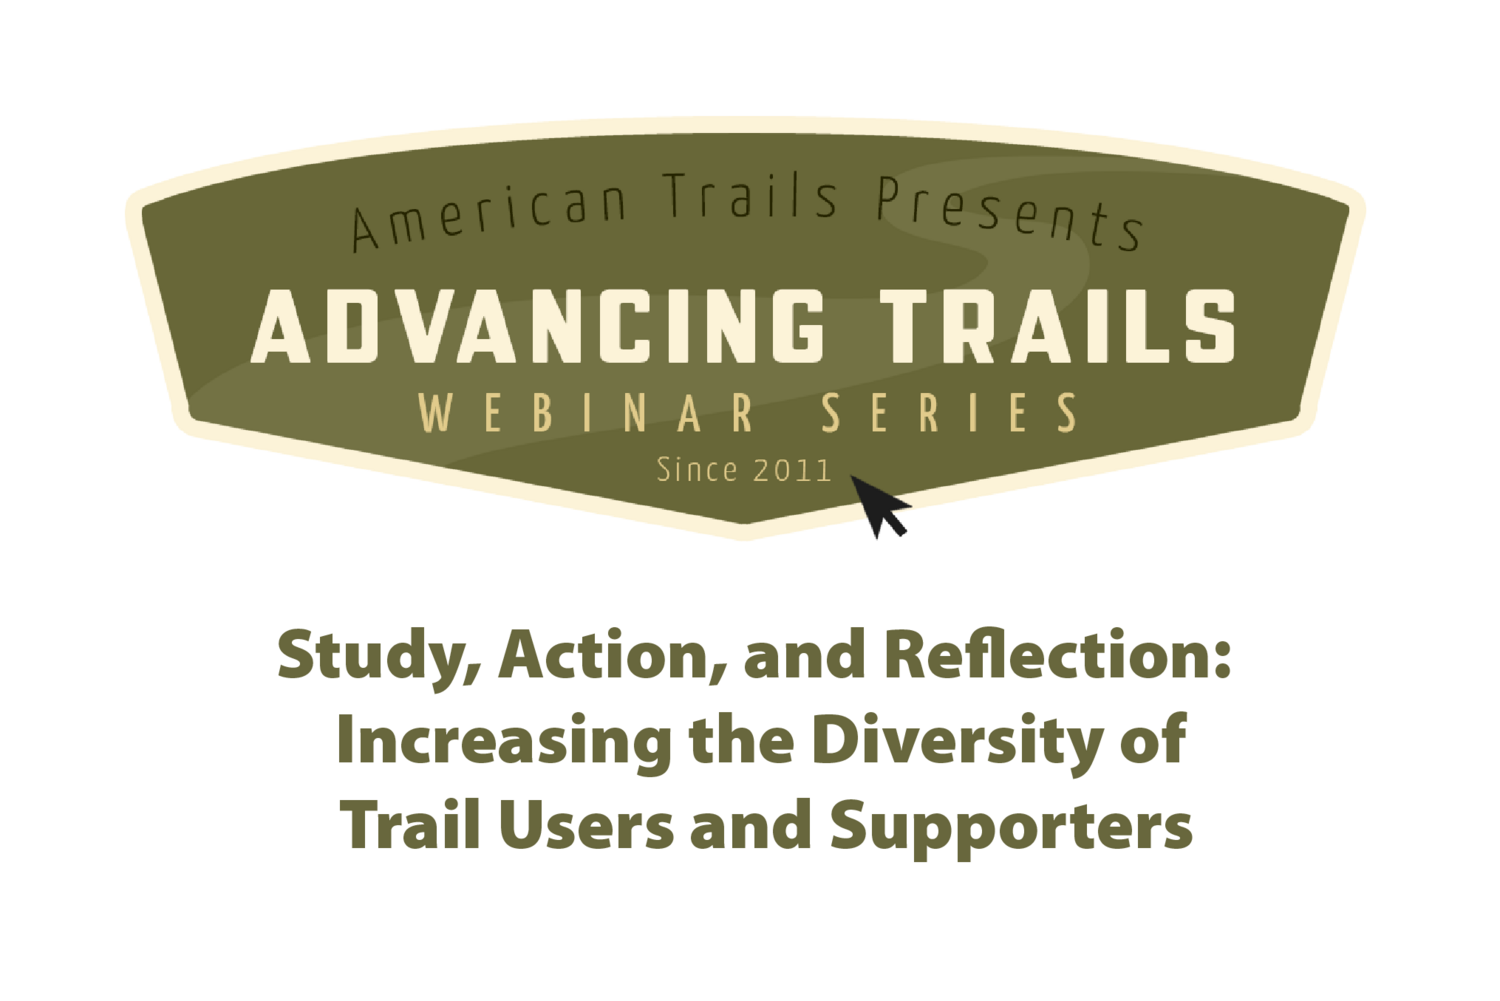 Study, Action, and Reflection: Increasing the Diversity of Trail Users and Supporters (RECORDING)